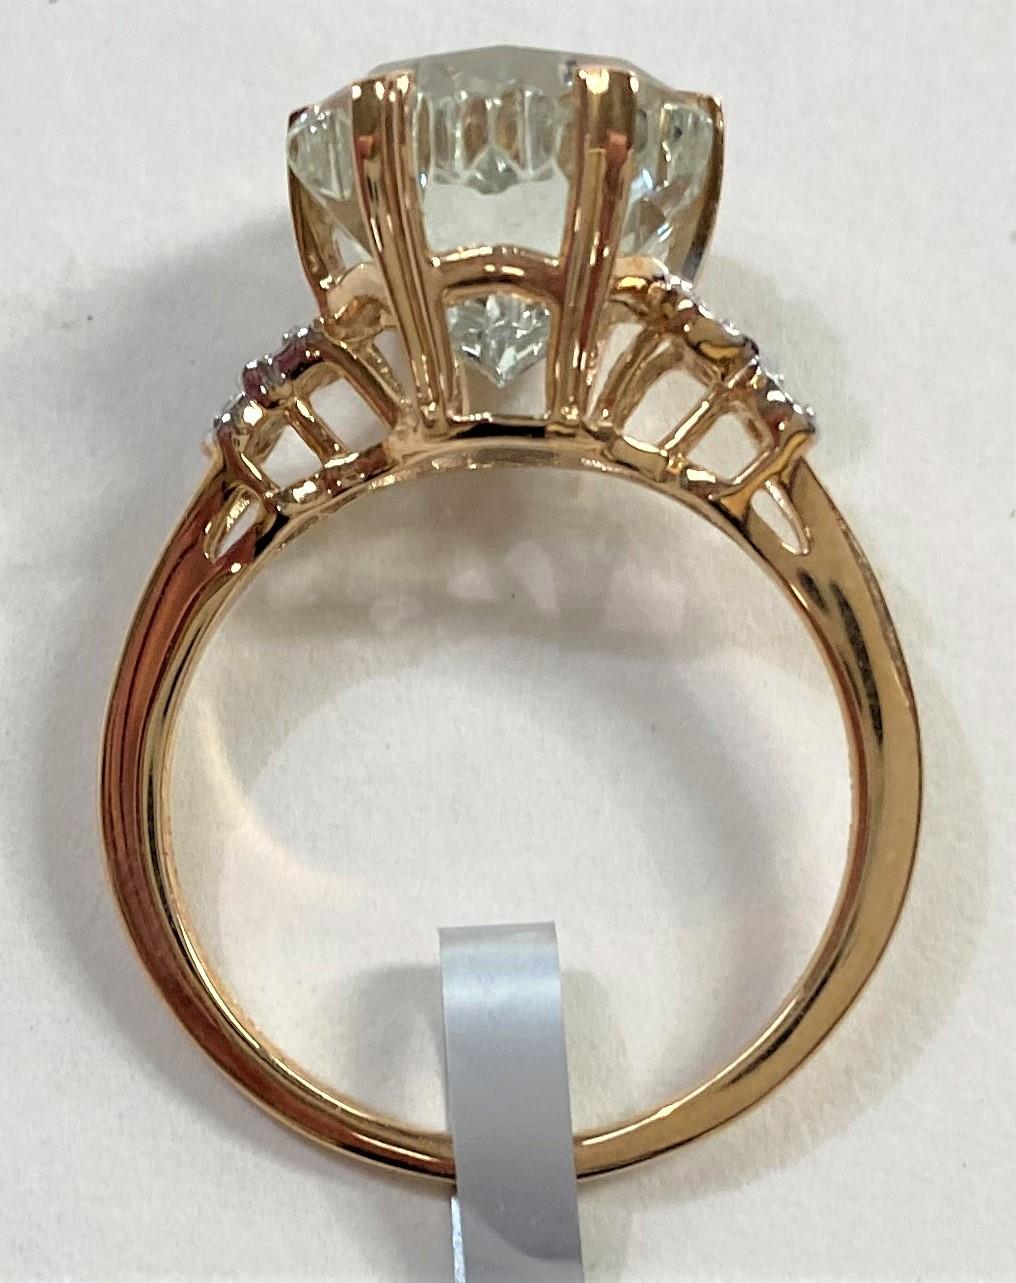 A lady's 9 carat gold dress ring set Wobito snowflake cut prasiolite stone, 4.12 carat, flanked by 4 - Image 2 of 6